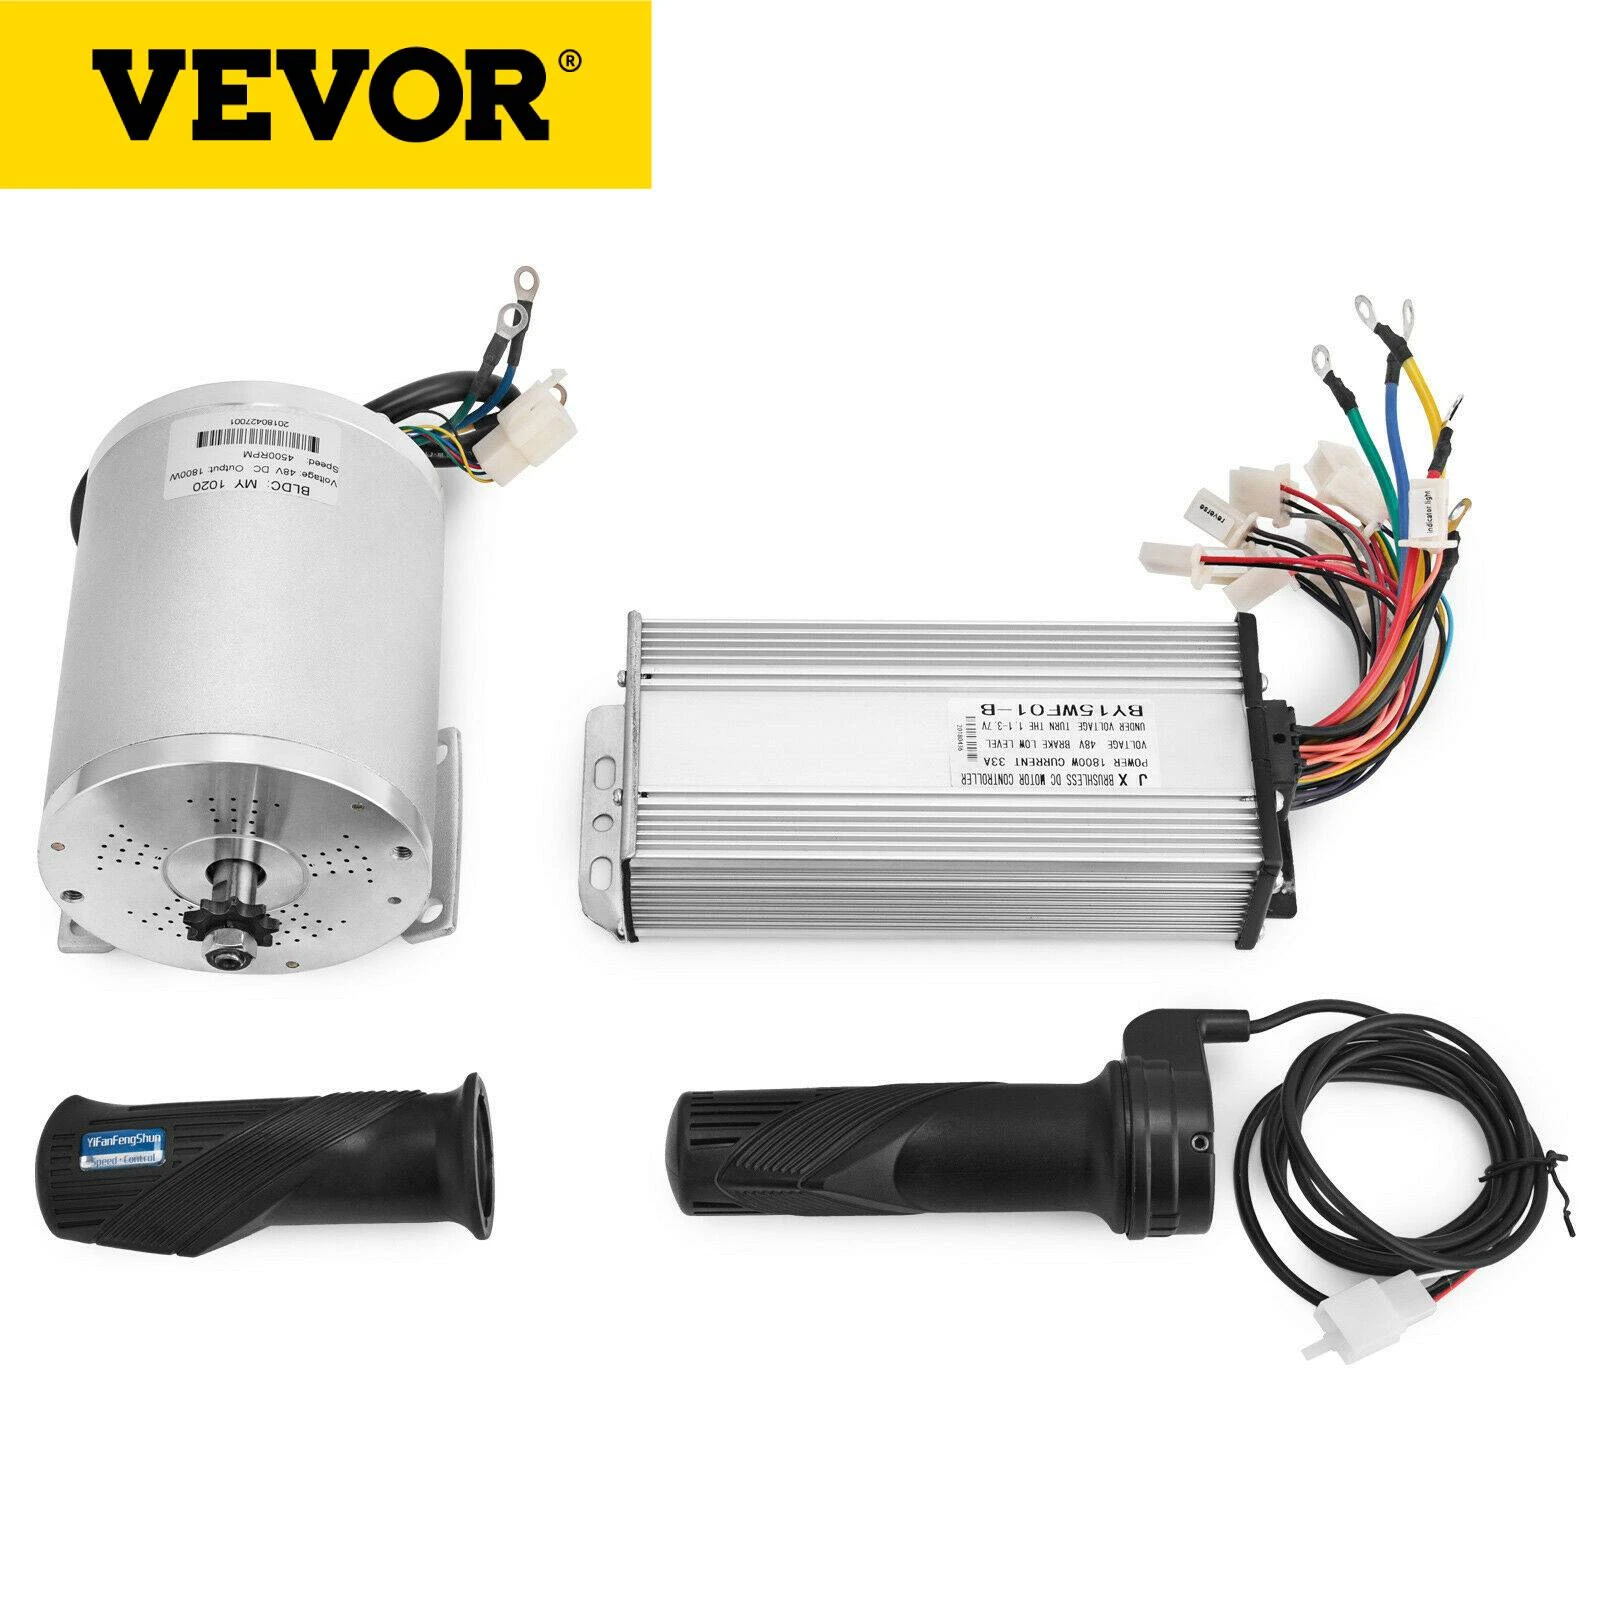 solid invention conspiracy Vevor Brushless Dc Motor Electric Bikes Motor 500w-3000w 36v-72v With Speed  Controller & Charger For E-scooters Go-karts E-bike - Dc Motor - AliExpress